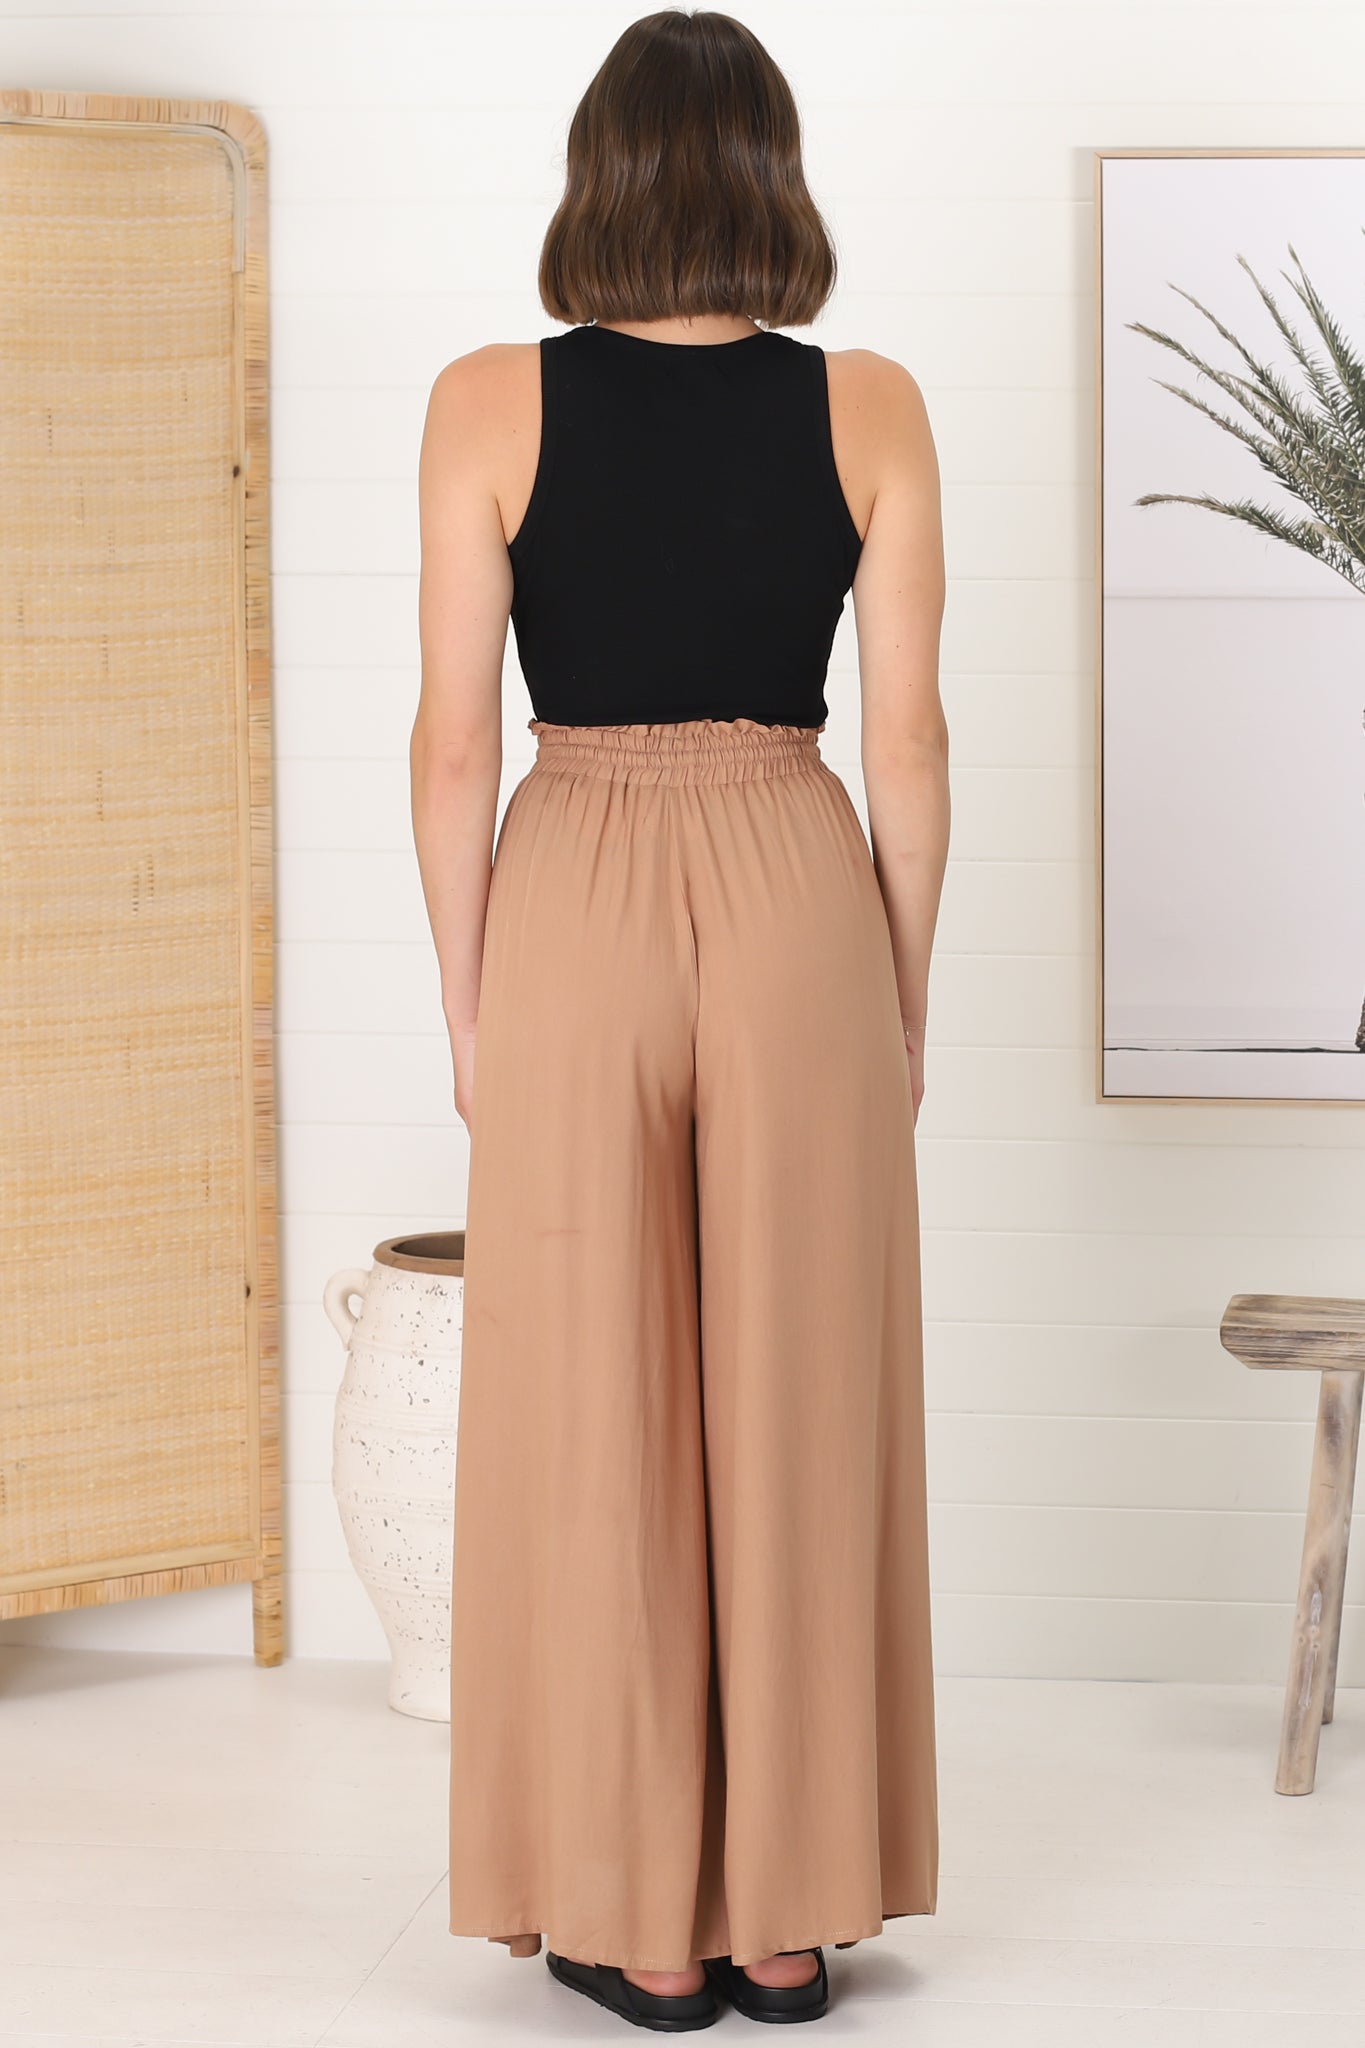 Charli Pants - Paper Bag High Waisted Wide Leg Pants in Camel